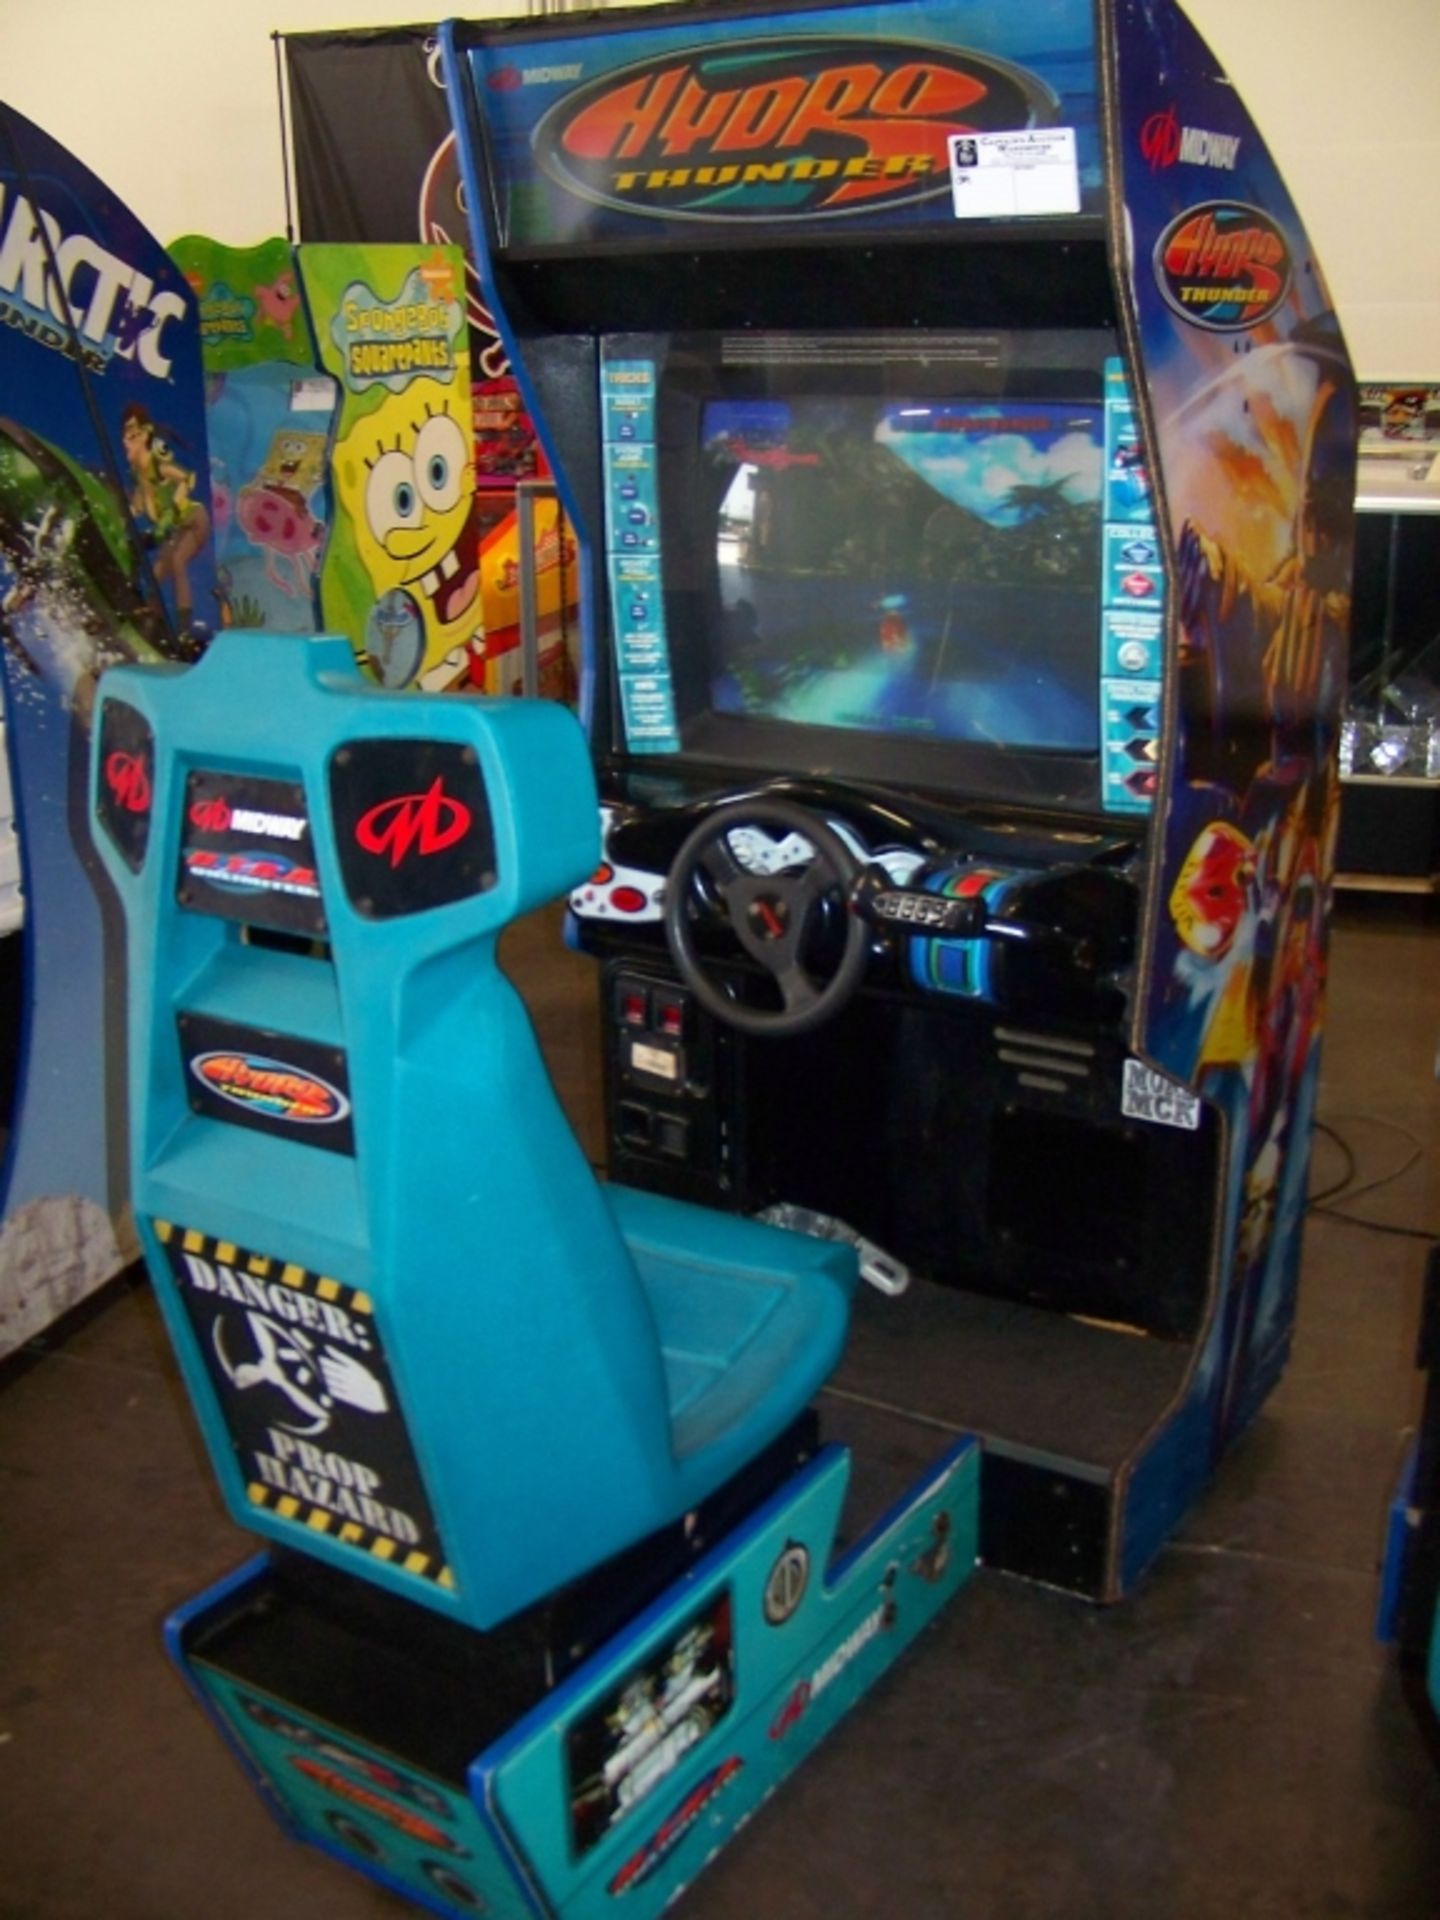 HYDRO THUNDER SITDOWN DRIVER ARCADE GAME  OM - Image 2 of 2